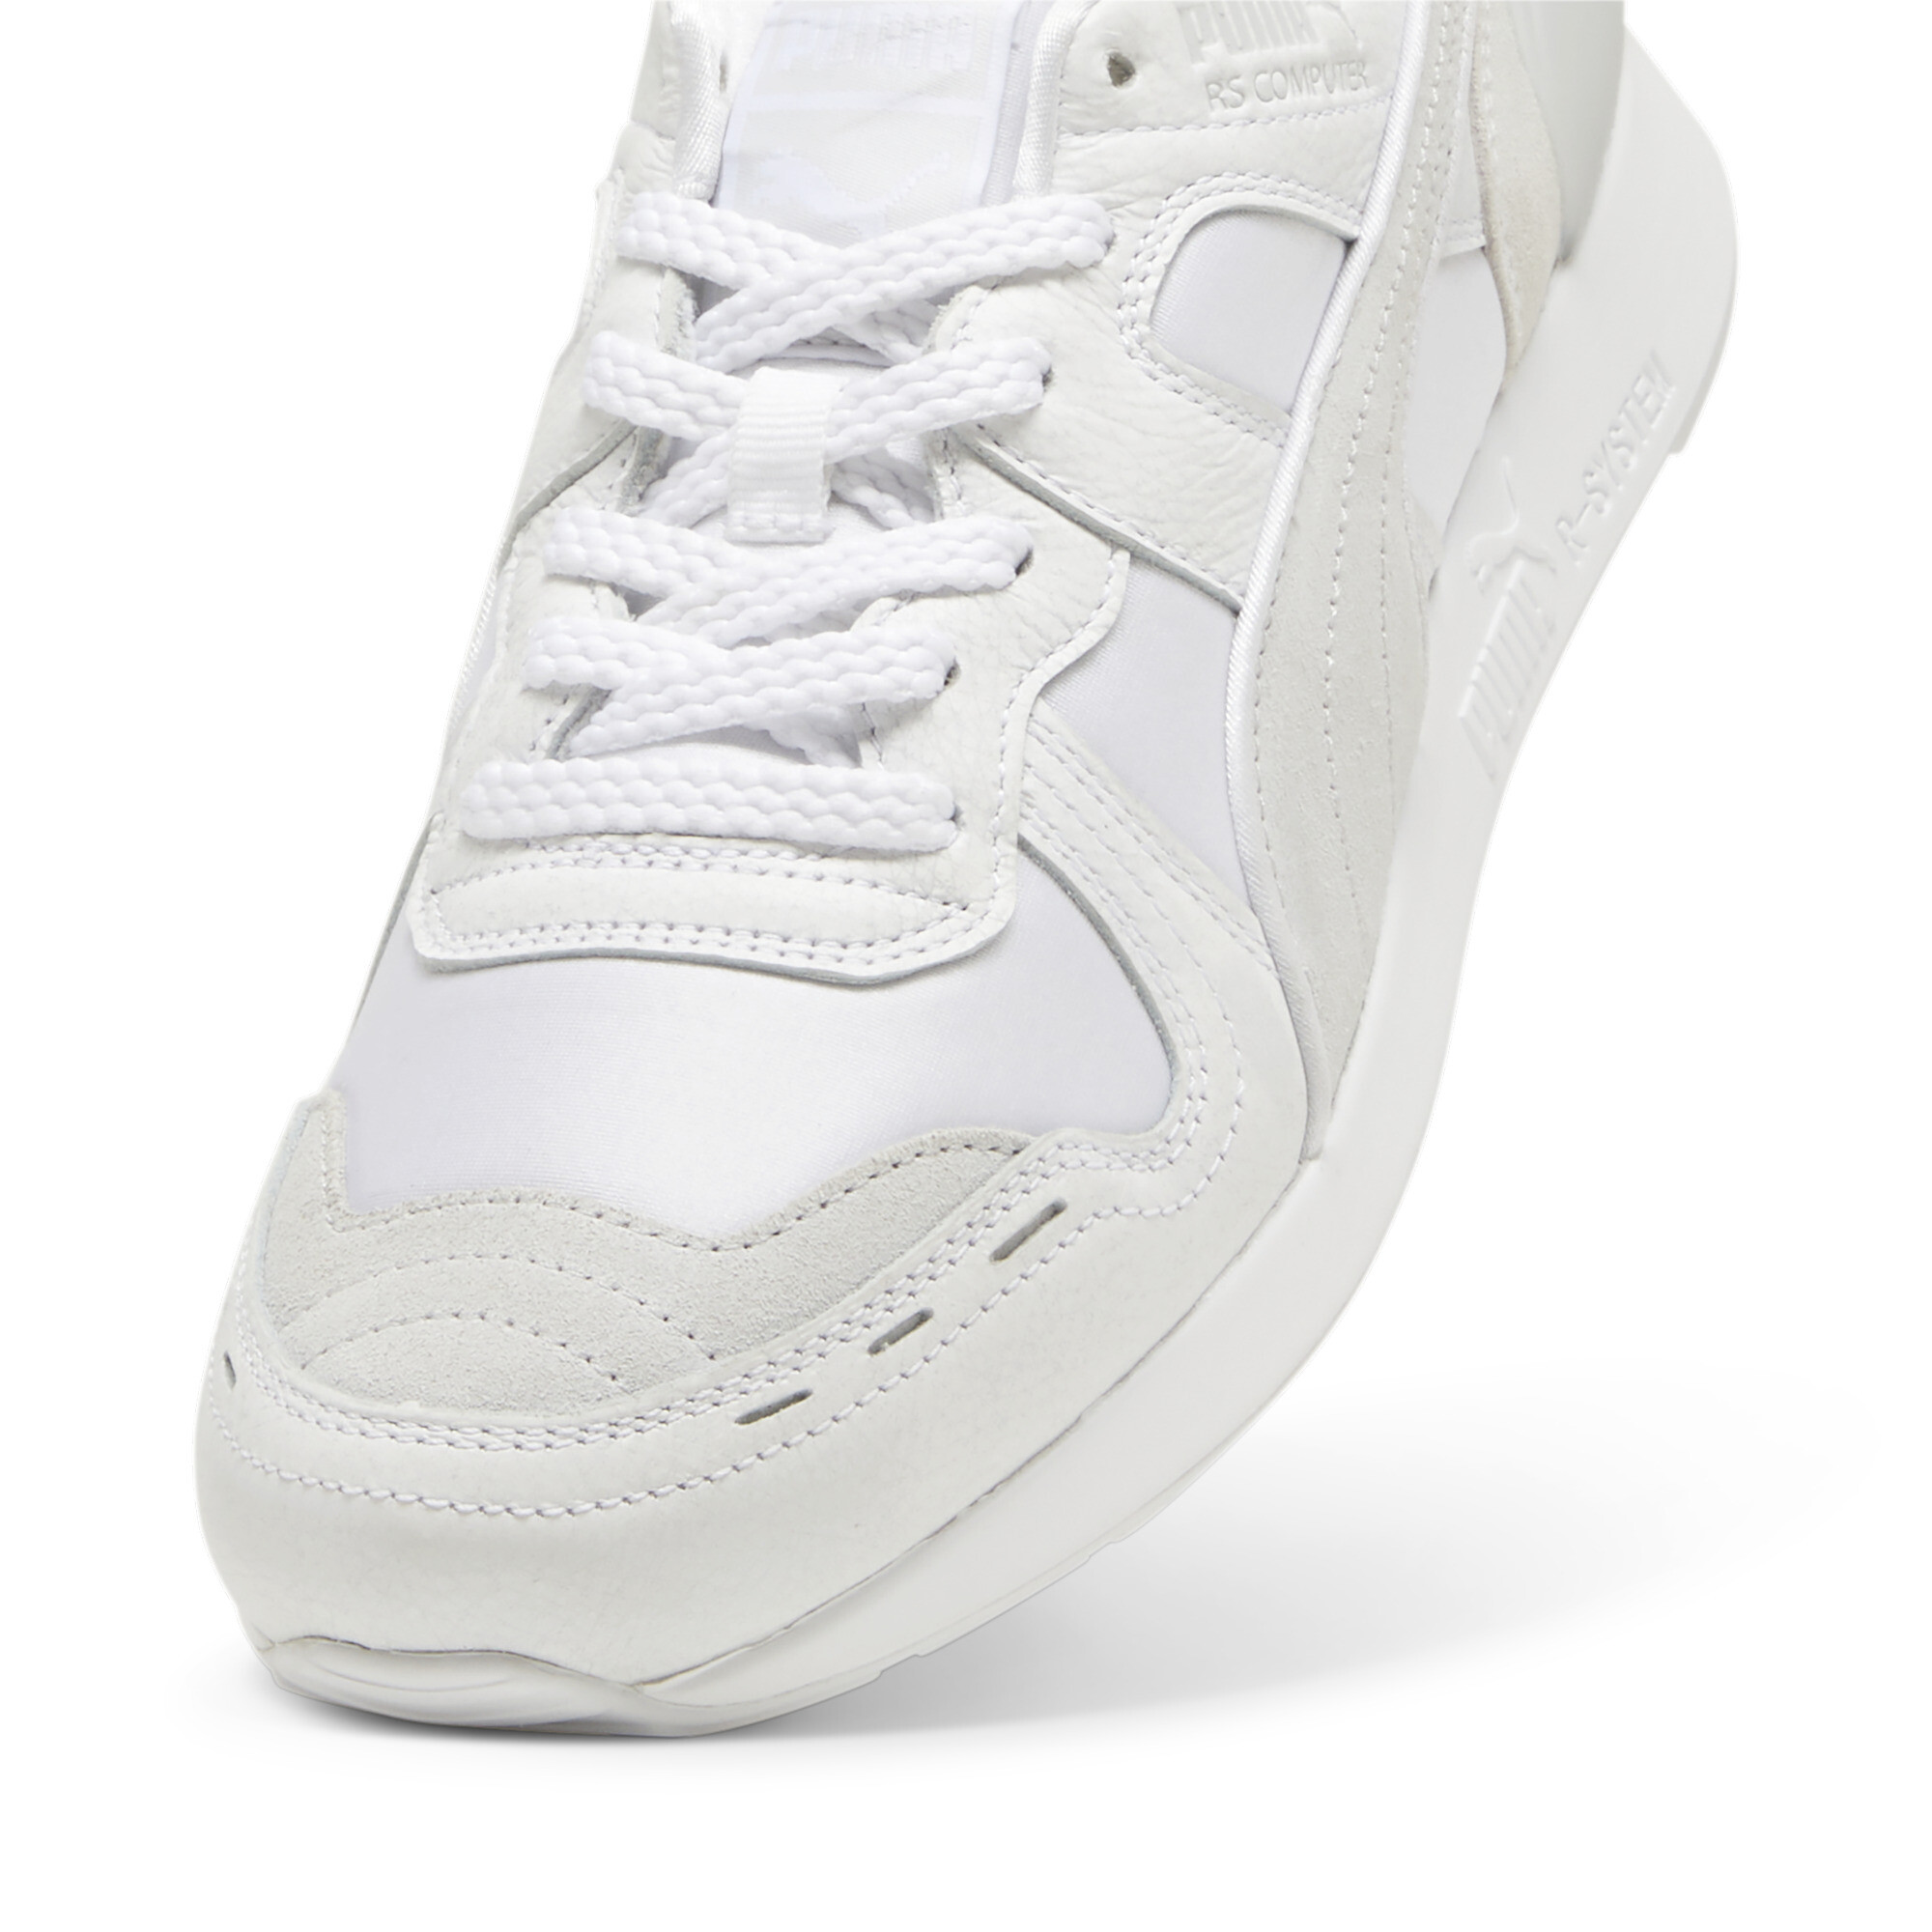 Puma RS-100 40th Anniversary Sneakers, White, Size 35.5, Shoes